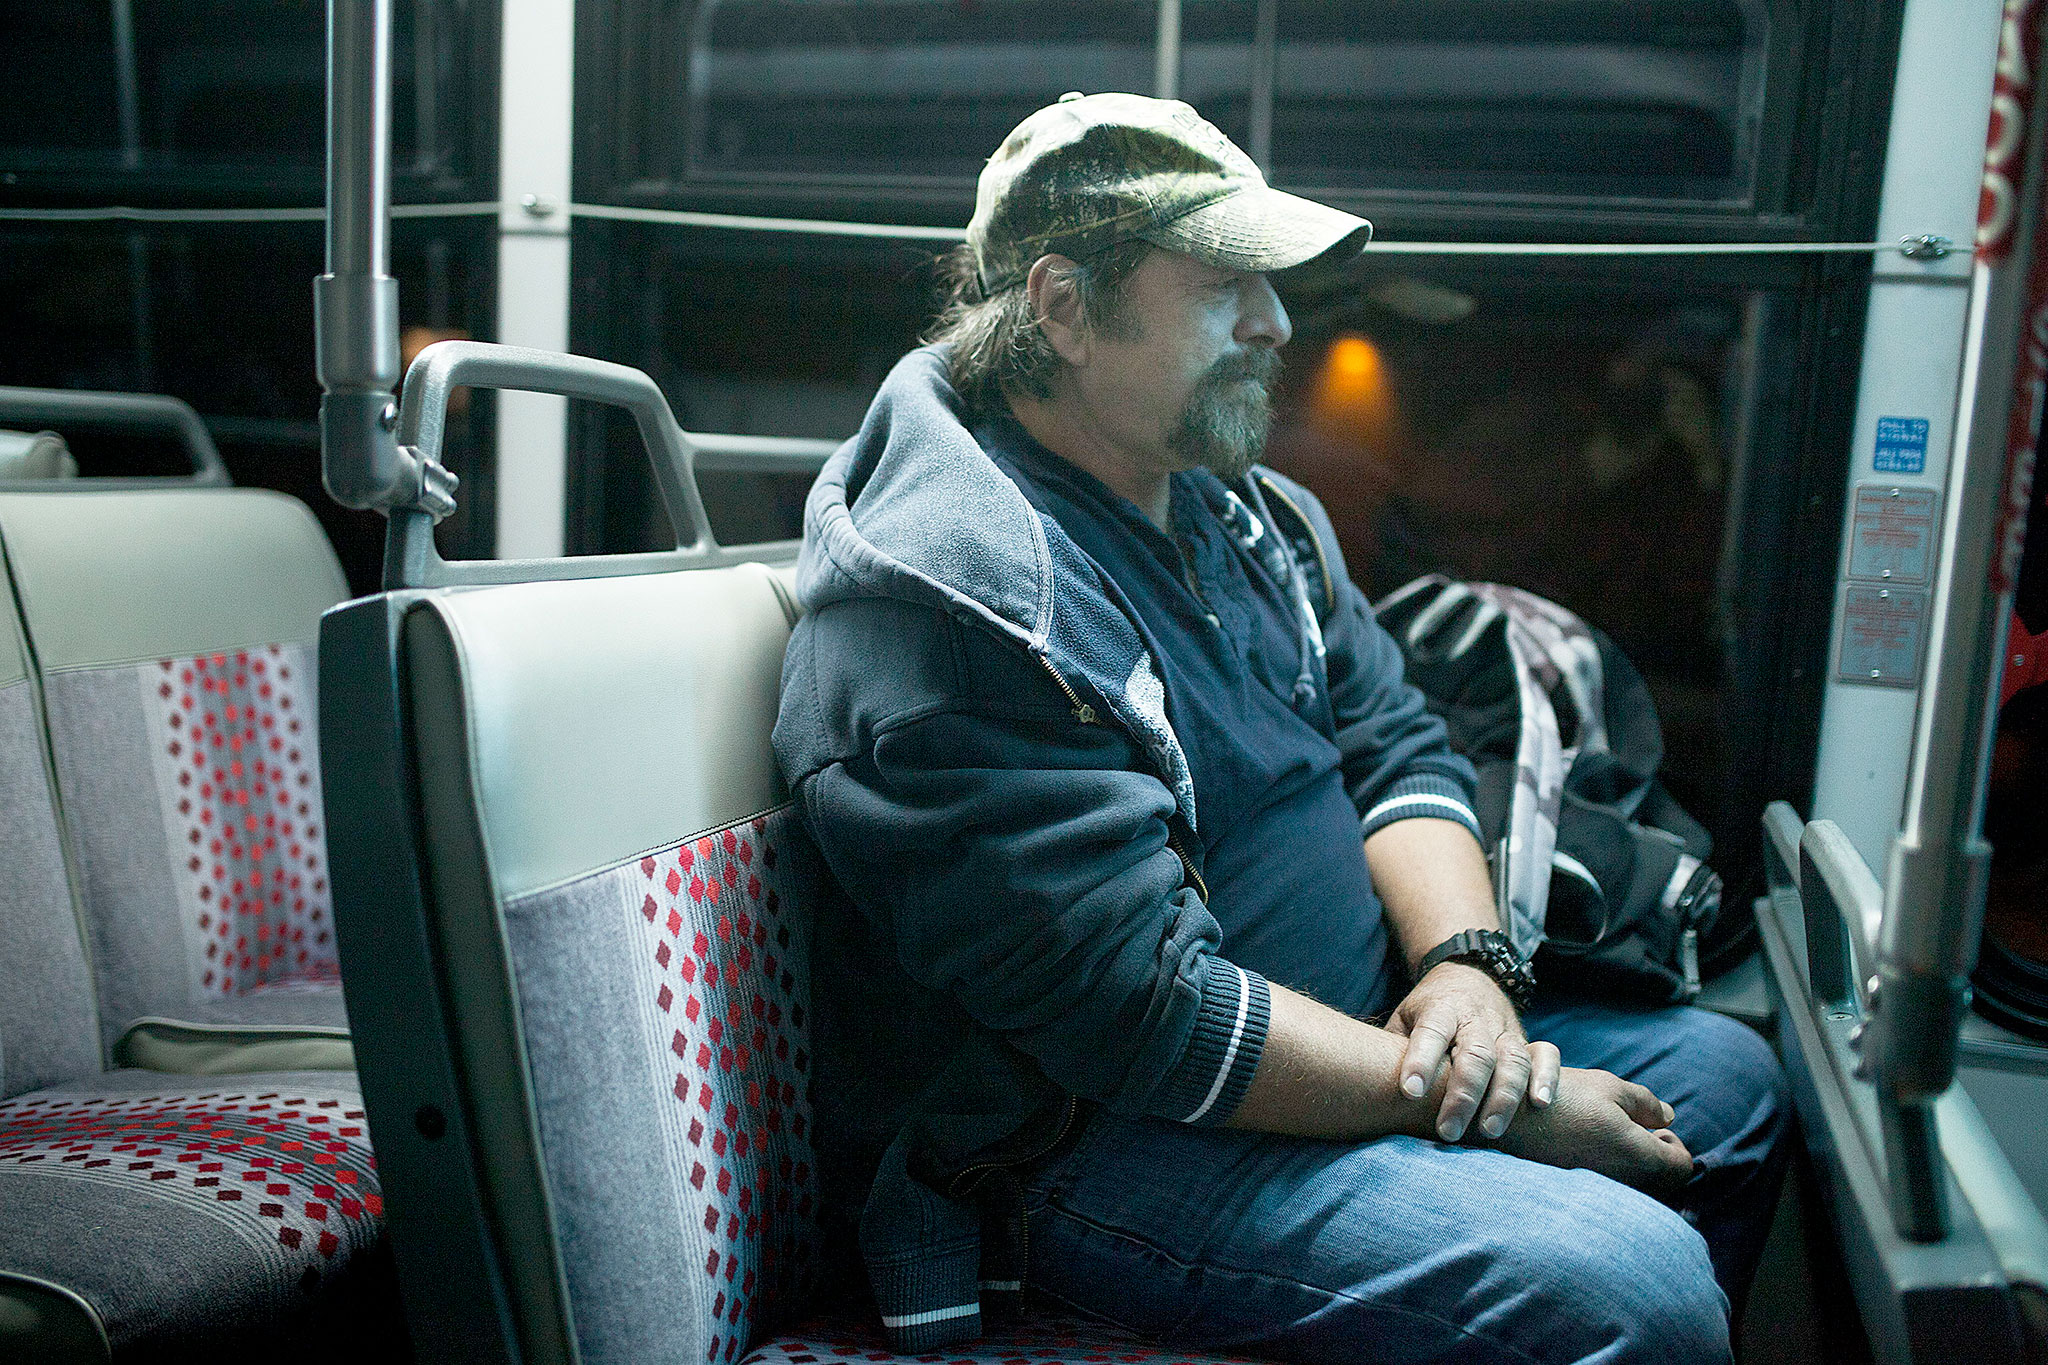 Gene Martin rides the bus before sunrise to an Alcoholics Anonymous meeting in Everett. (Ian Terry / The Herald)